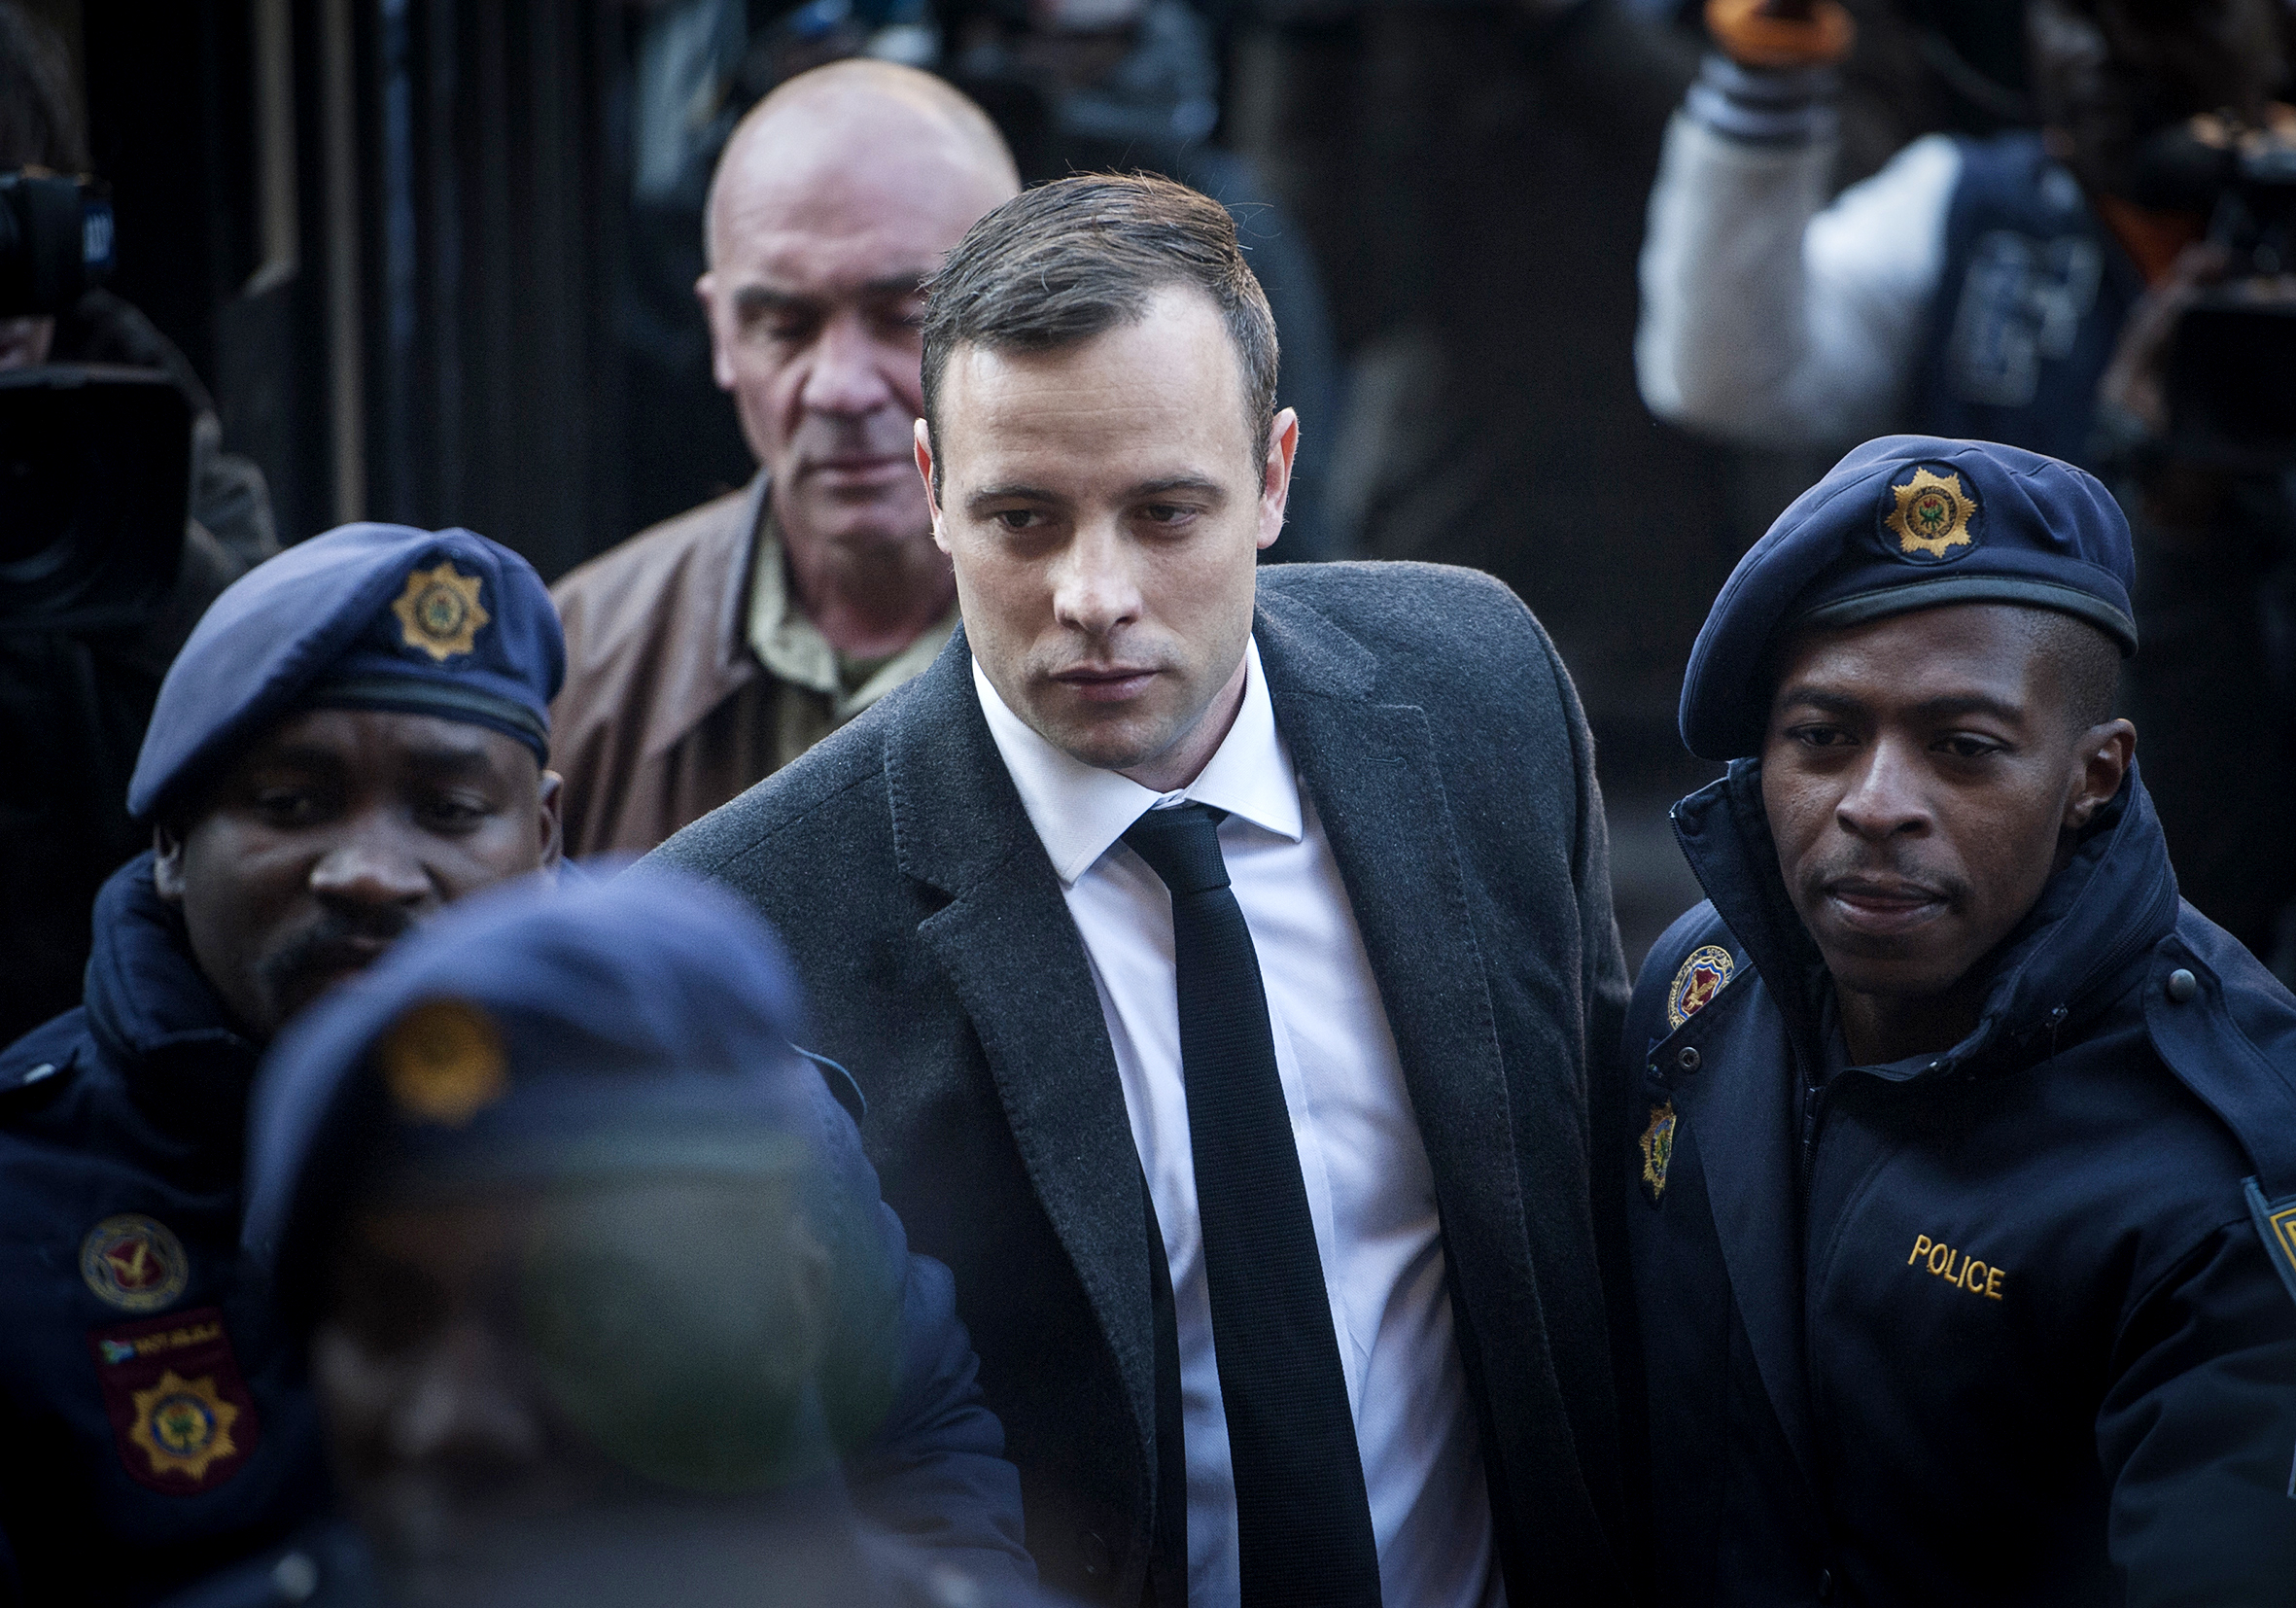 PHOTO: Oscar Pistorius, center, arrives at the High Court in Pretoria, South Africa, July 6, 2016.